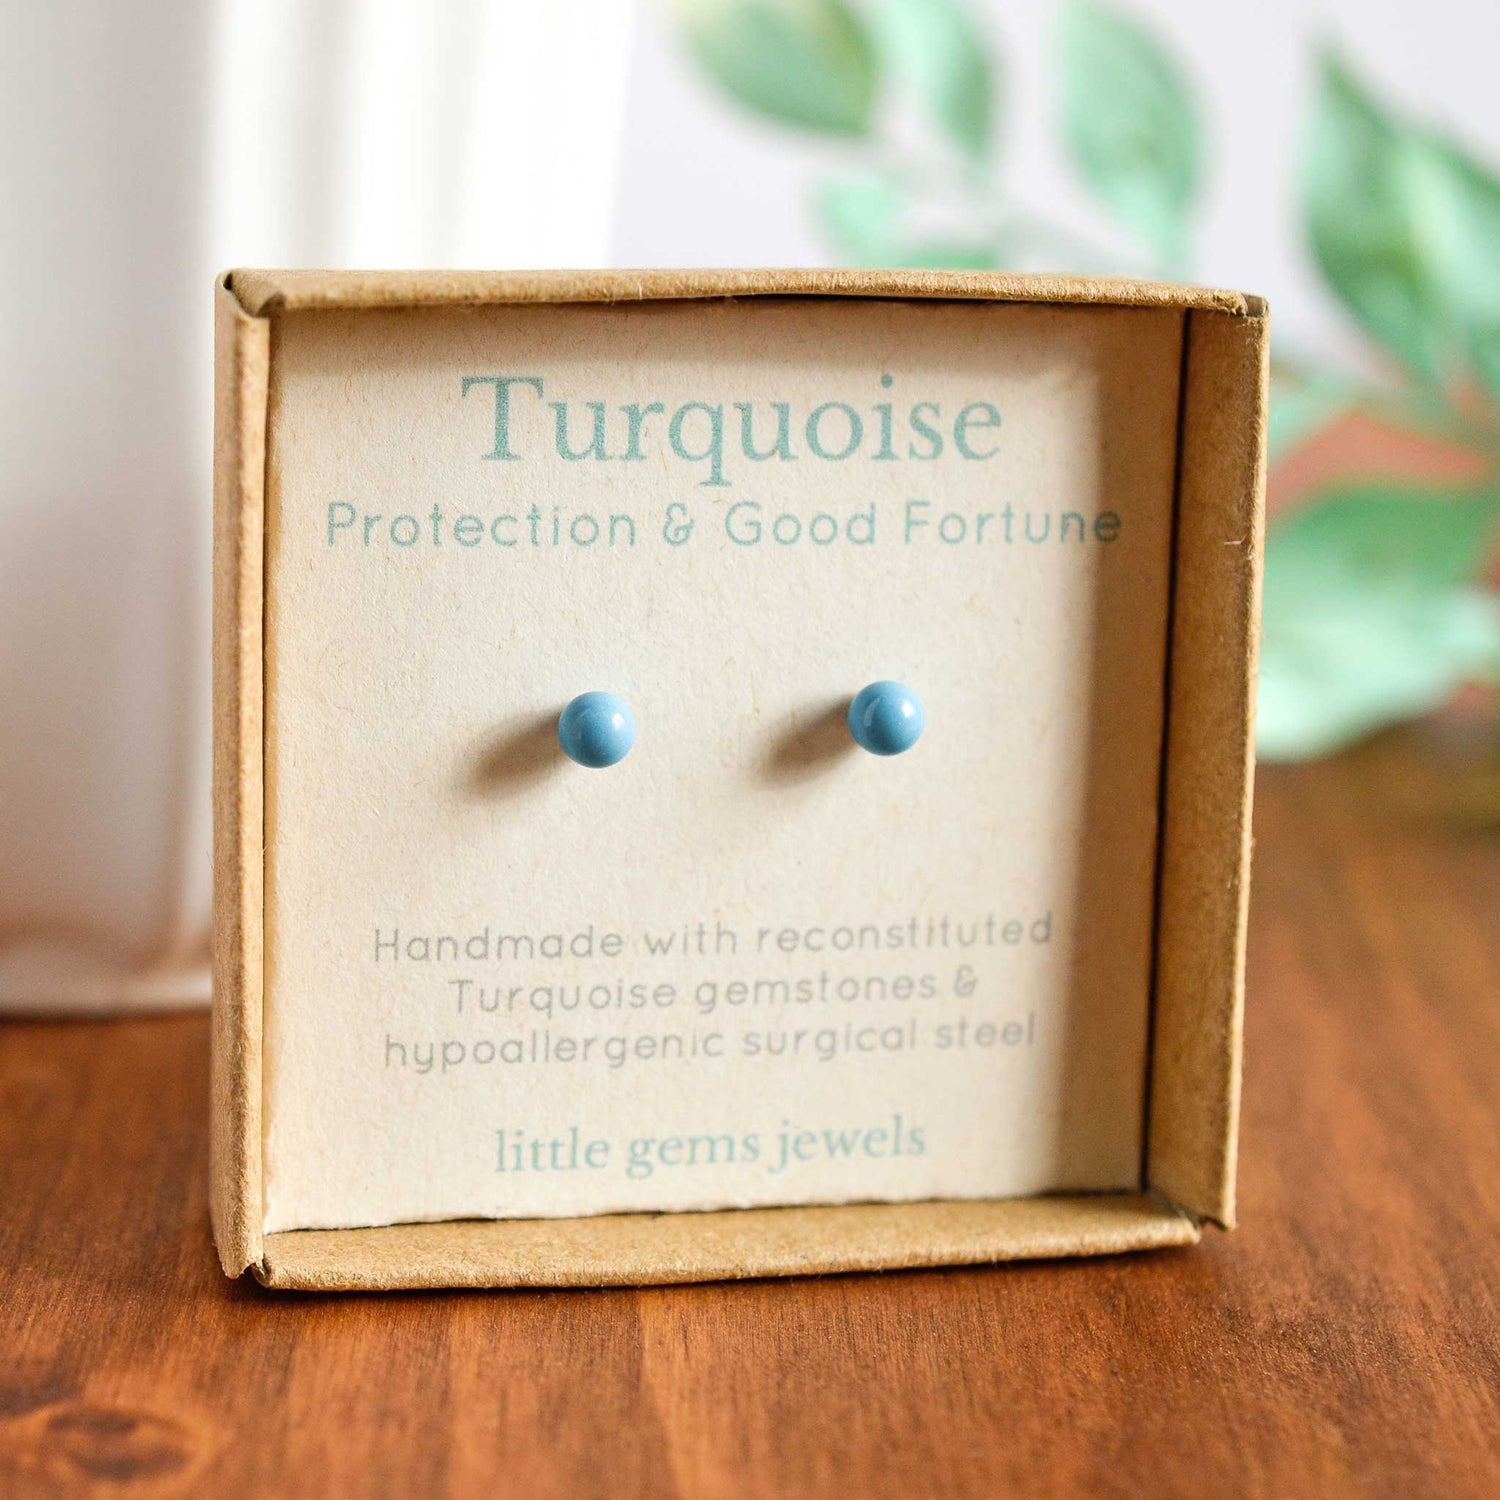 Dainty Turquoise stud earrings in eco friendly gift box